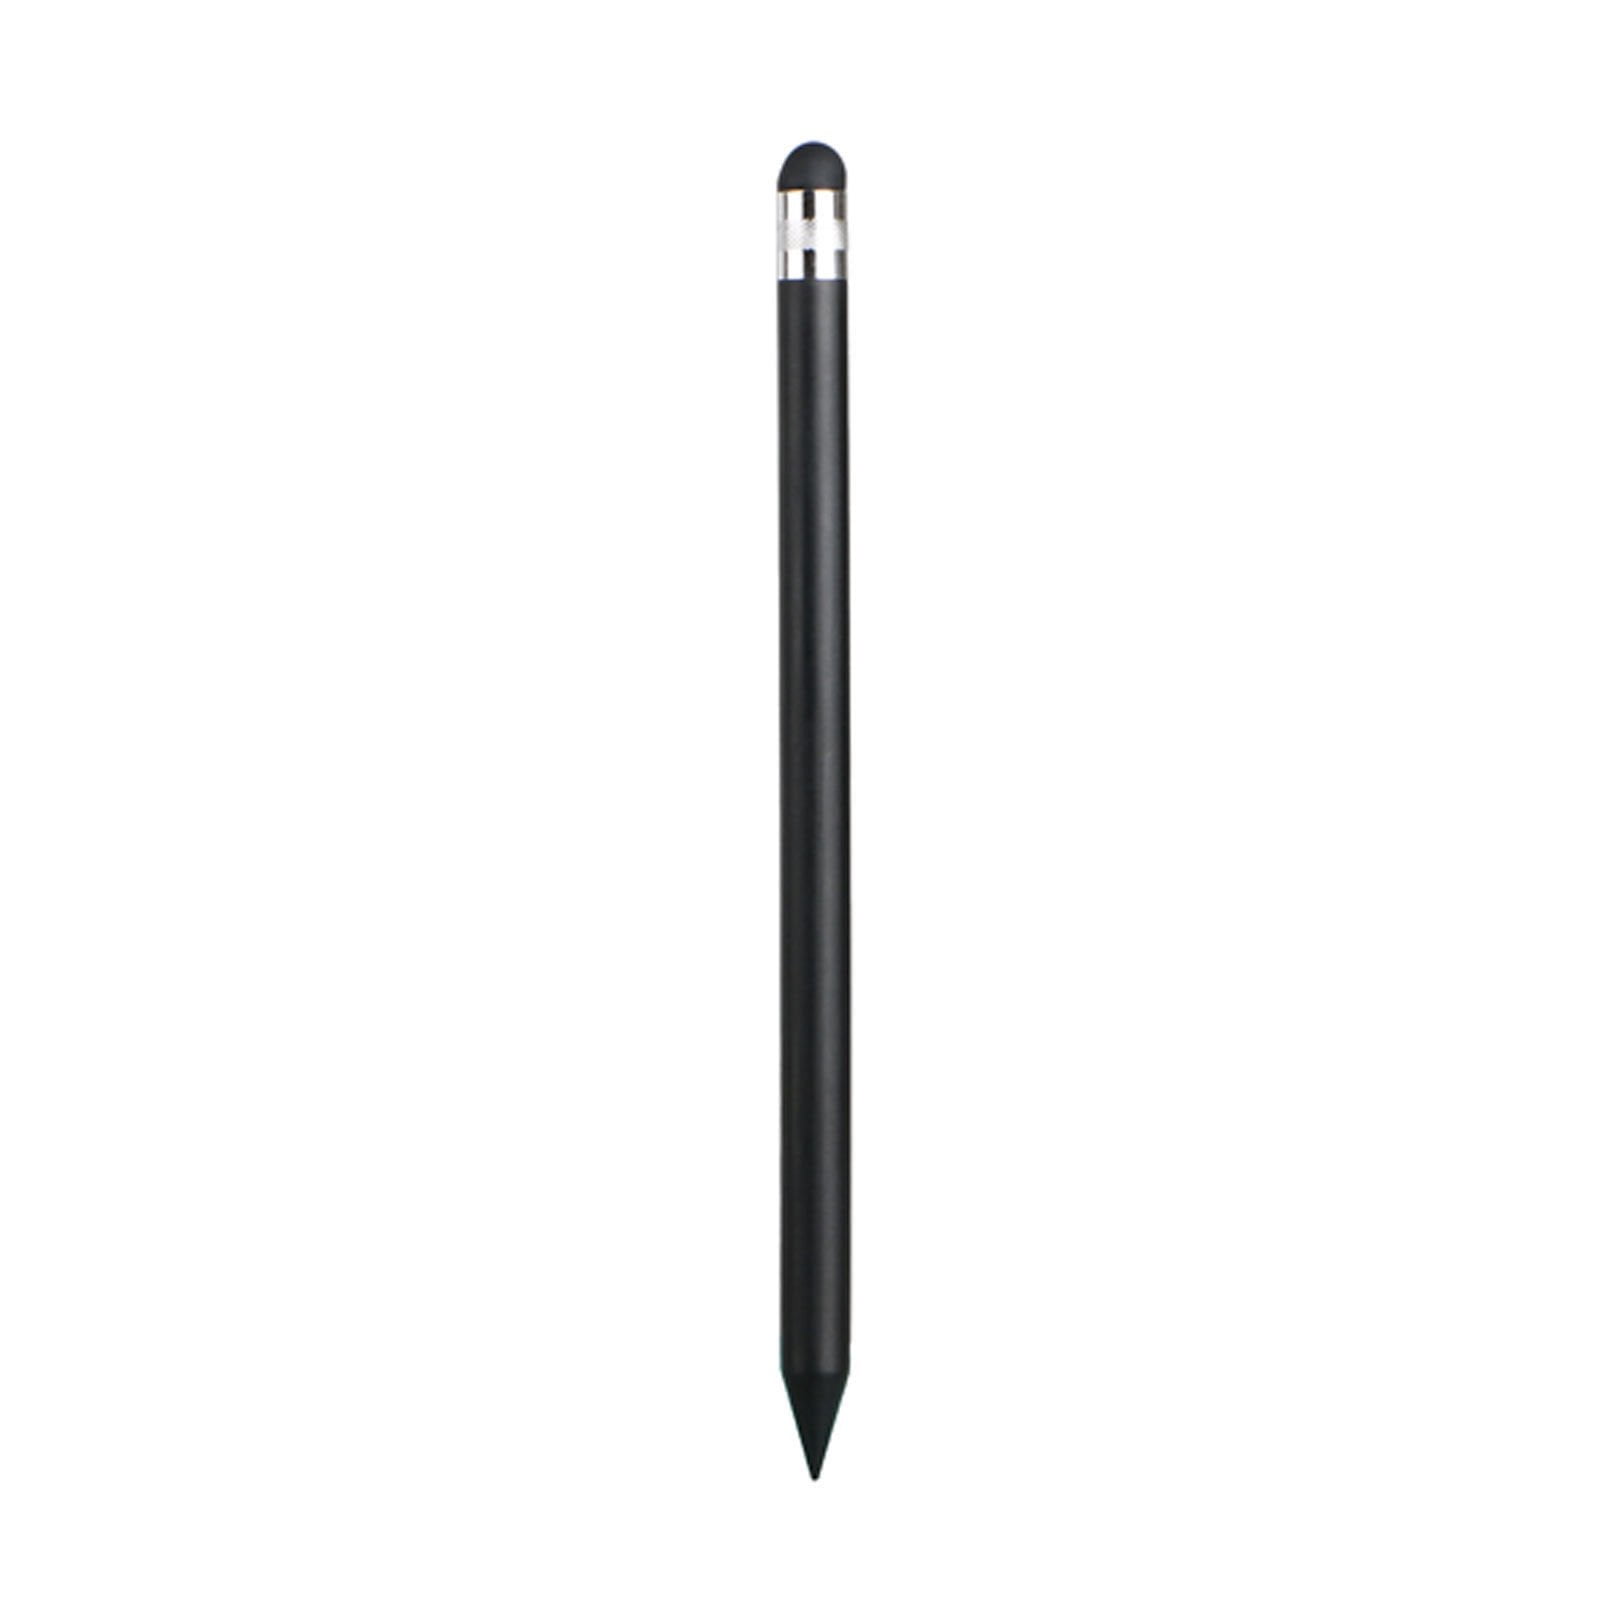 Capacitive Touch Screen Stylus Pen For iPhone Samsung HTC Tablet iPAD 